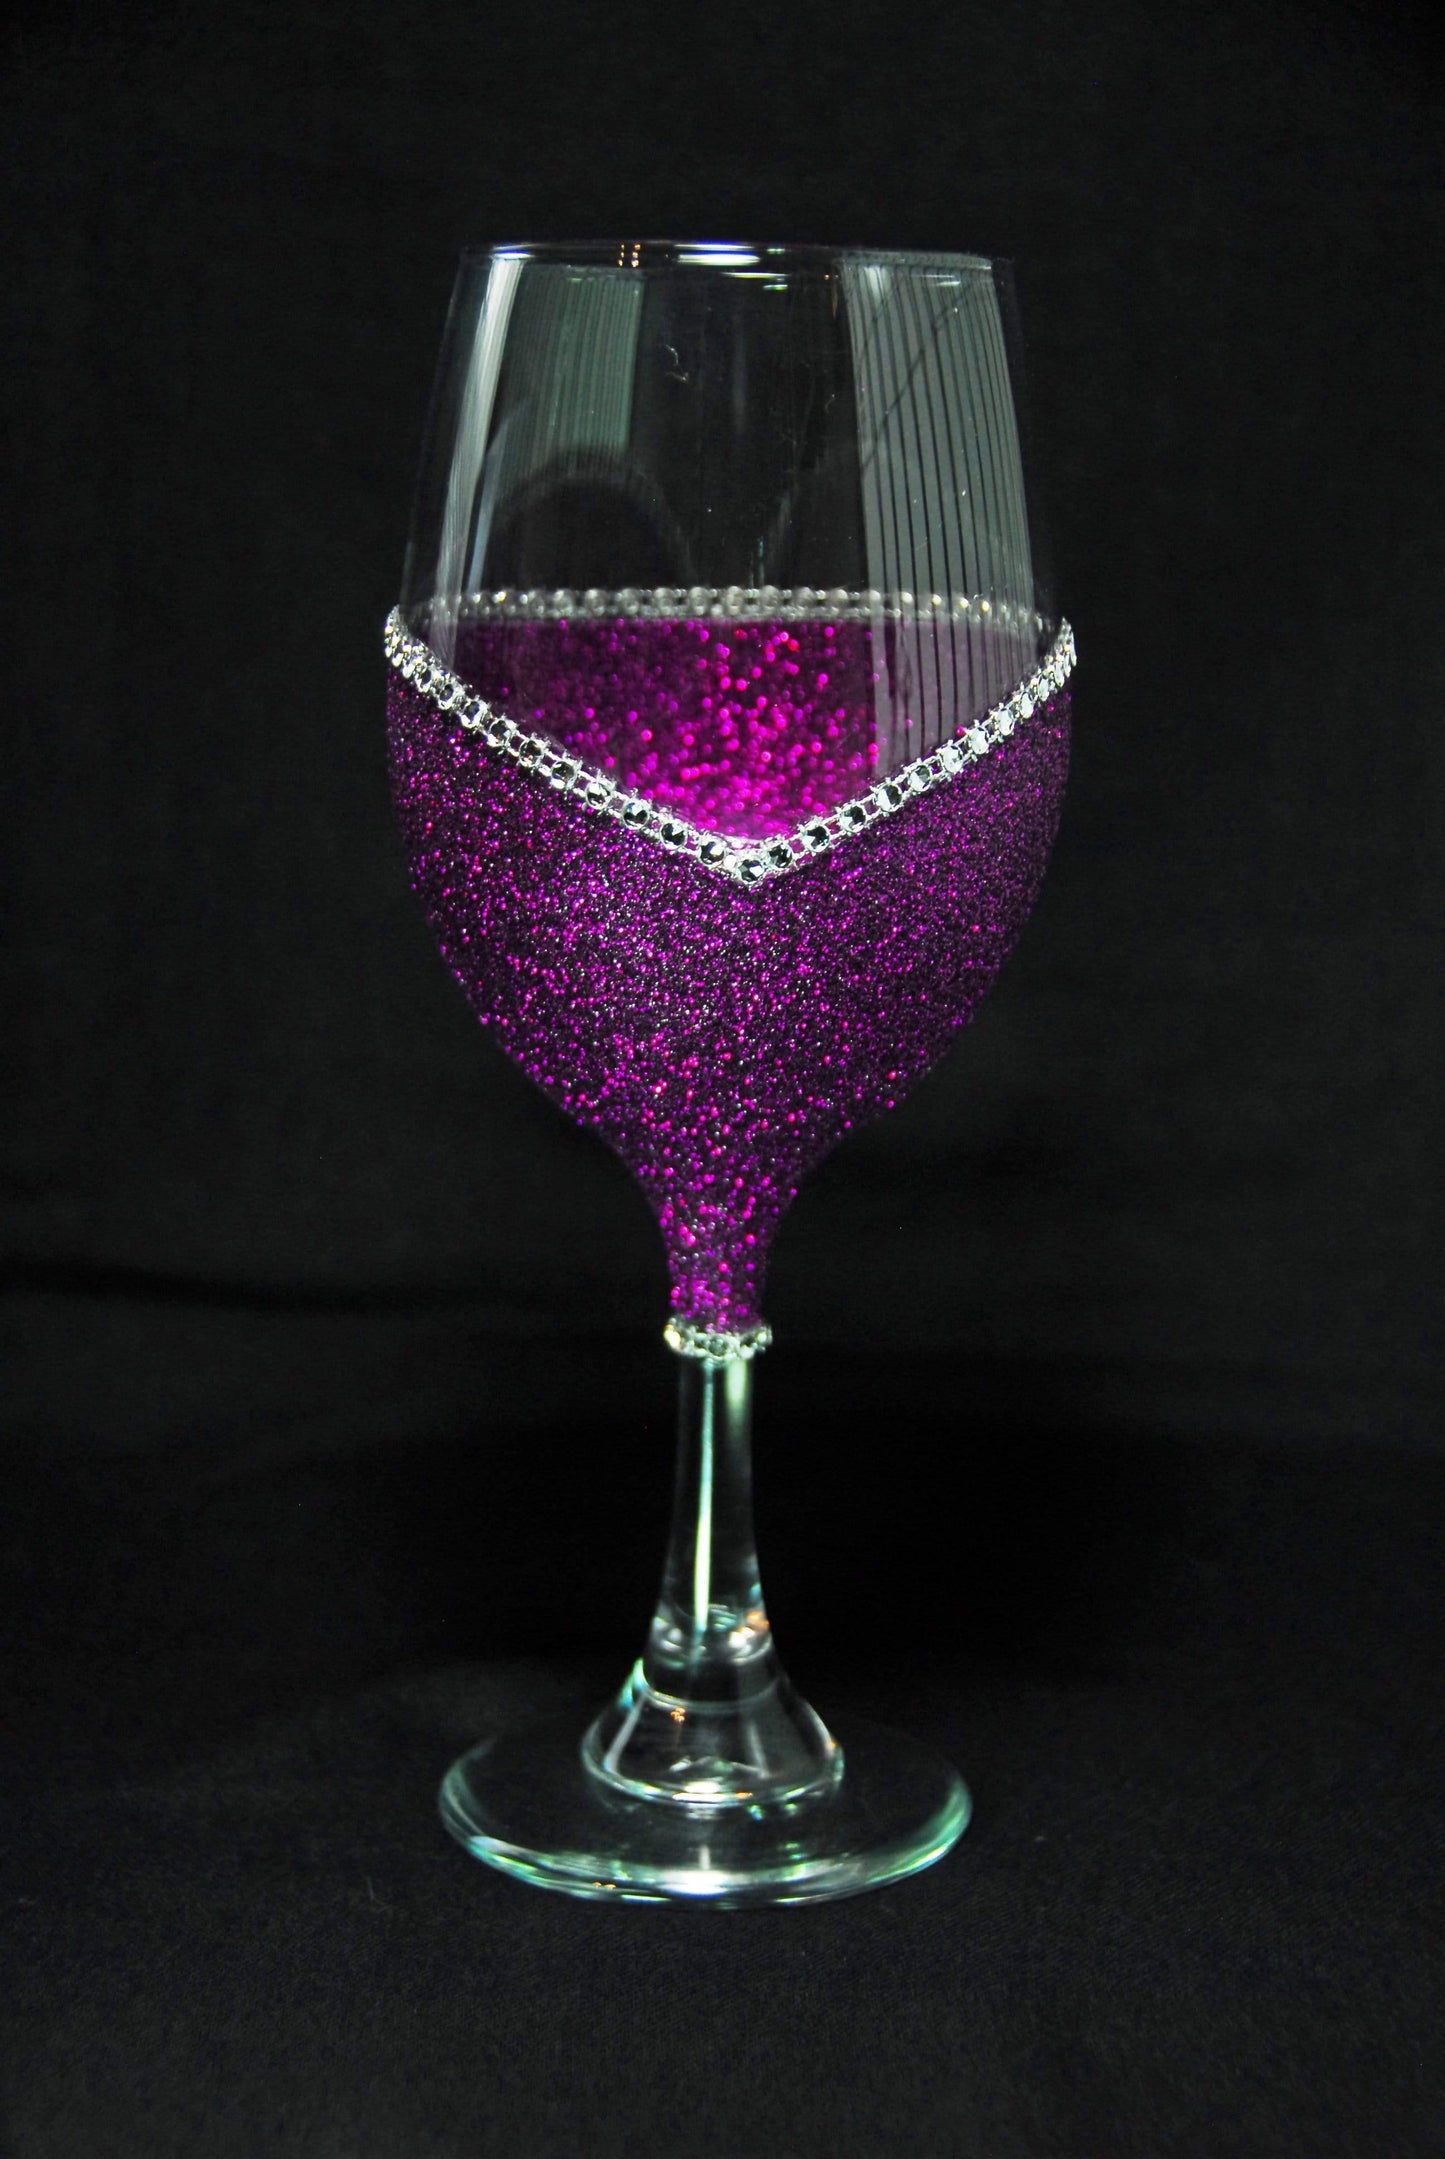 Floral Skull Design #1-Bling Stem or Stemless Wine Glasses-Choose your color-Pirate Theme - Winey Bitches - Wine- Women- K9's